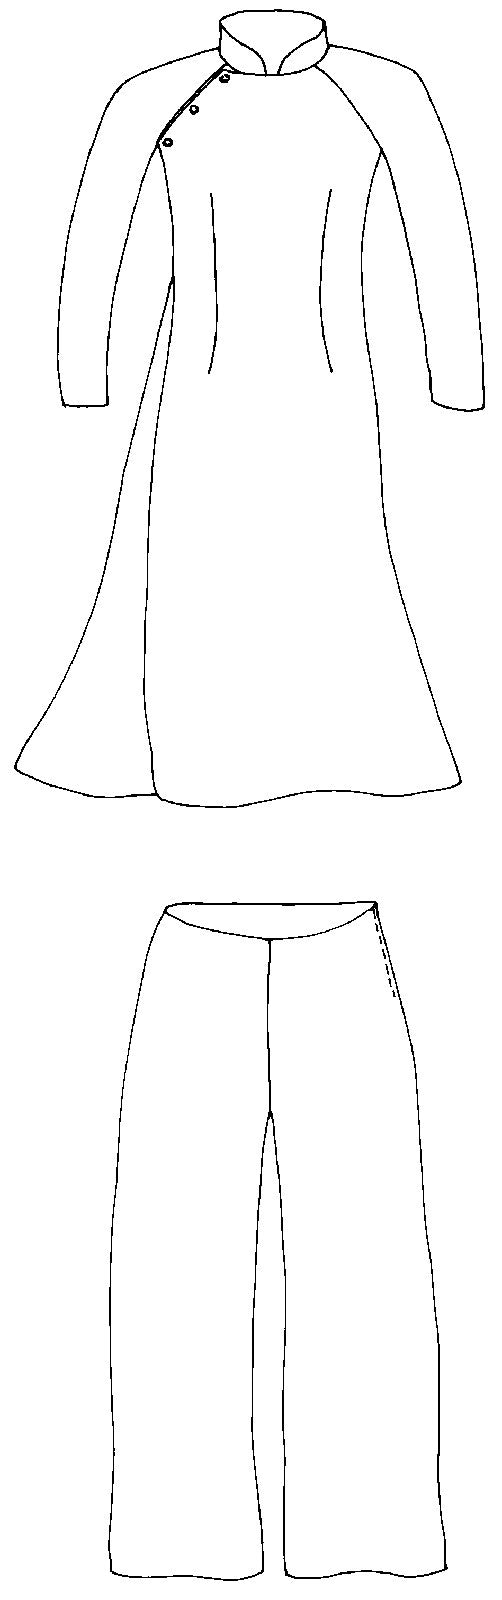 Flat line drawing of front view of tunic and pants.